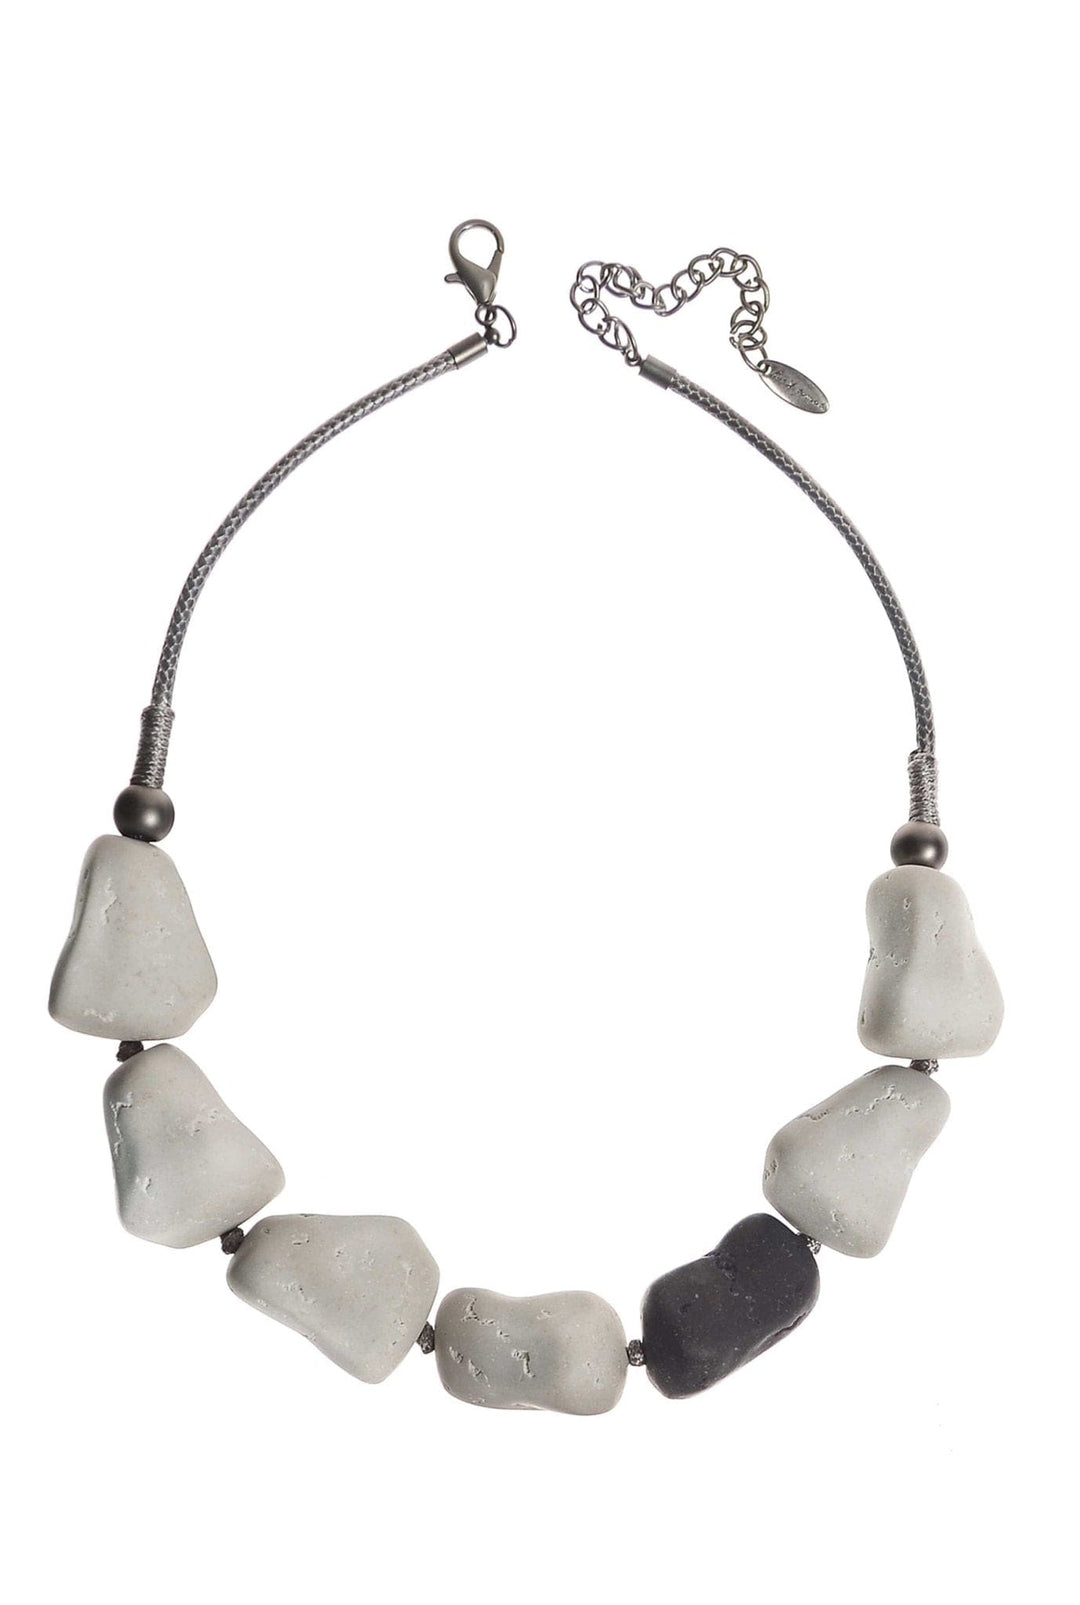 Hot Tomato Rock the look Necklace In Multi Stone - Crabtree Cottage